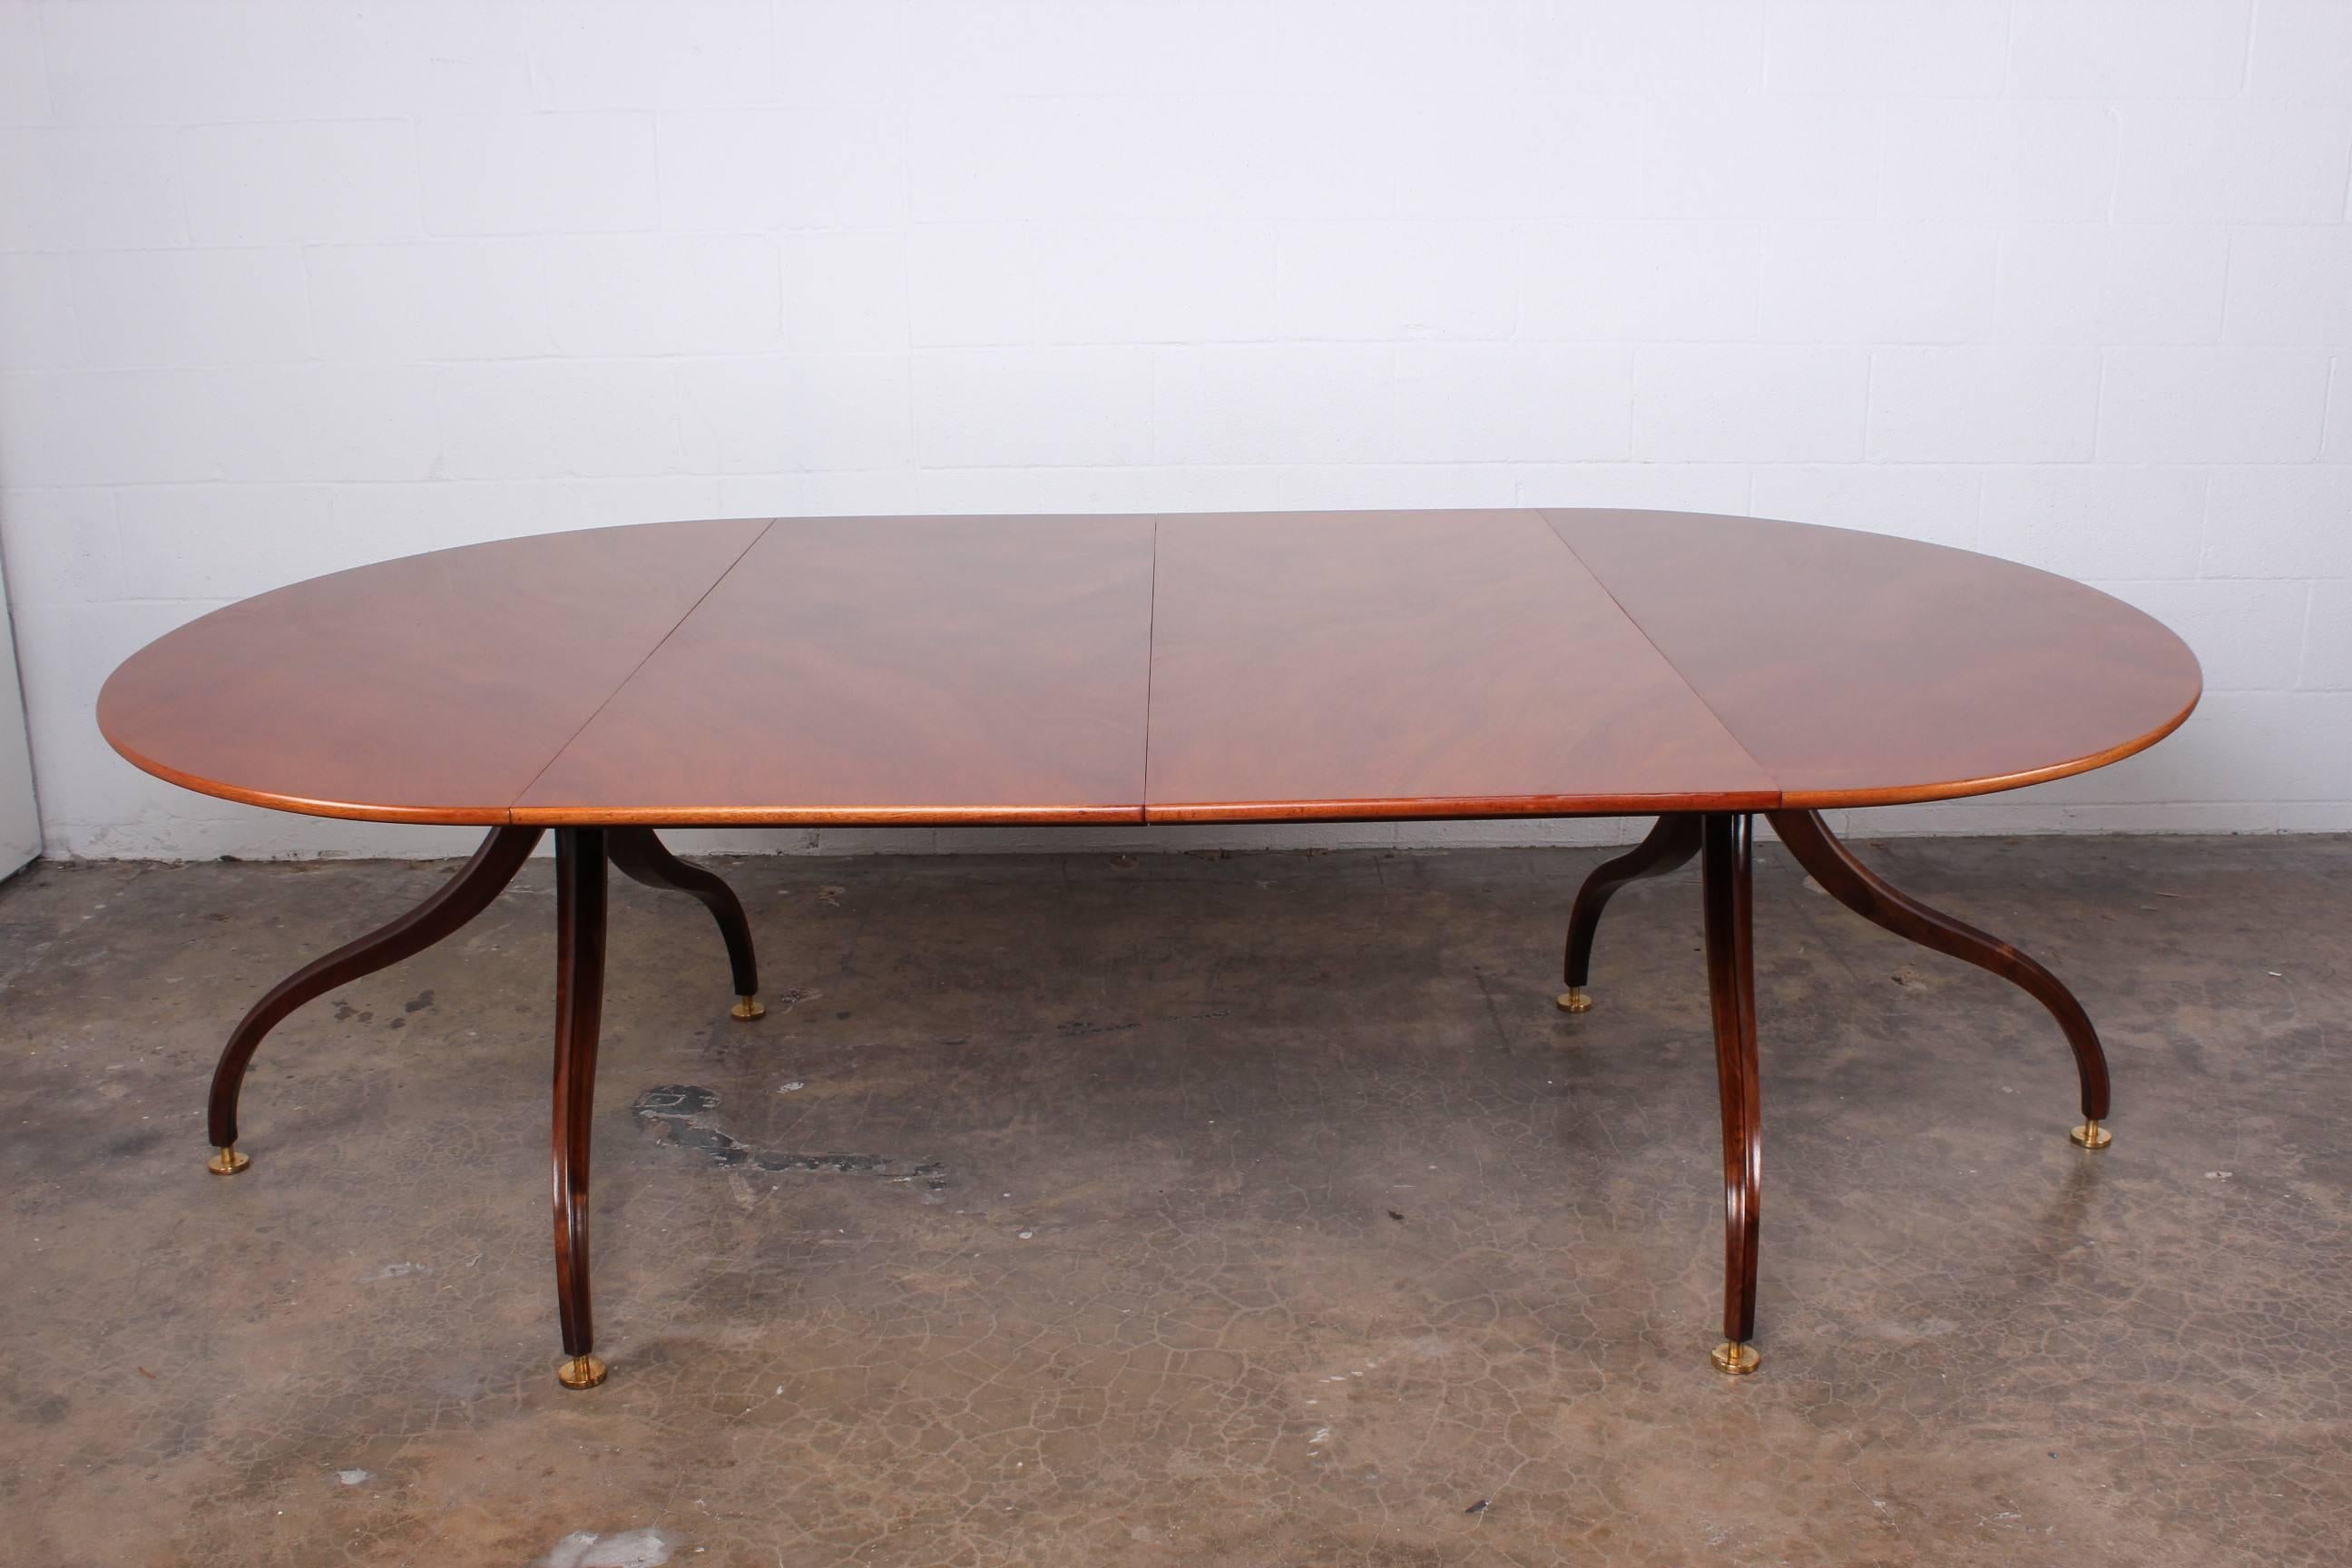 A rare design by Edward Wormley for Dunbar. This table has two 22